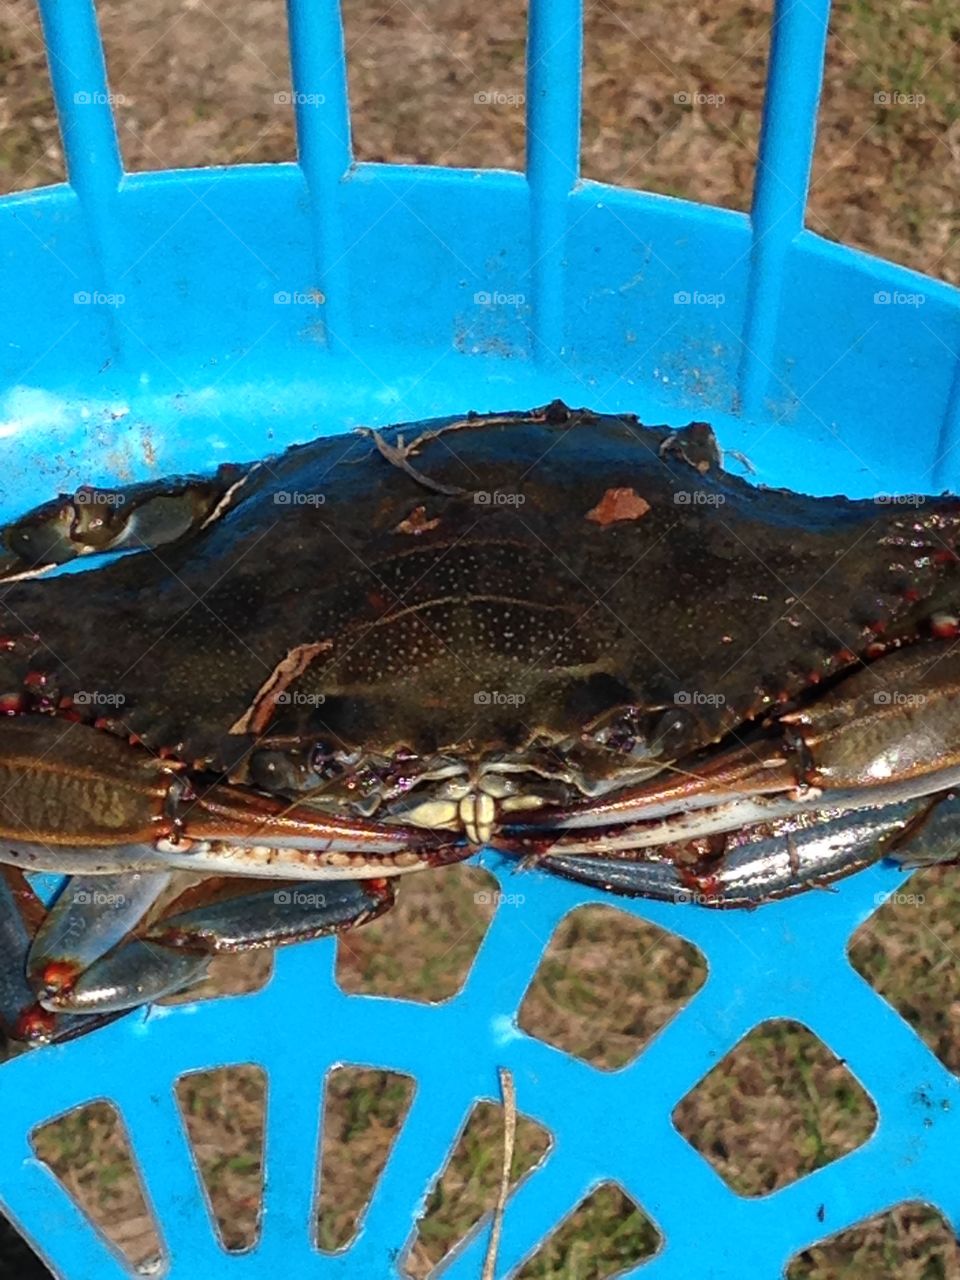 Blue Claw Crab caught in a basket